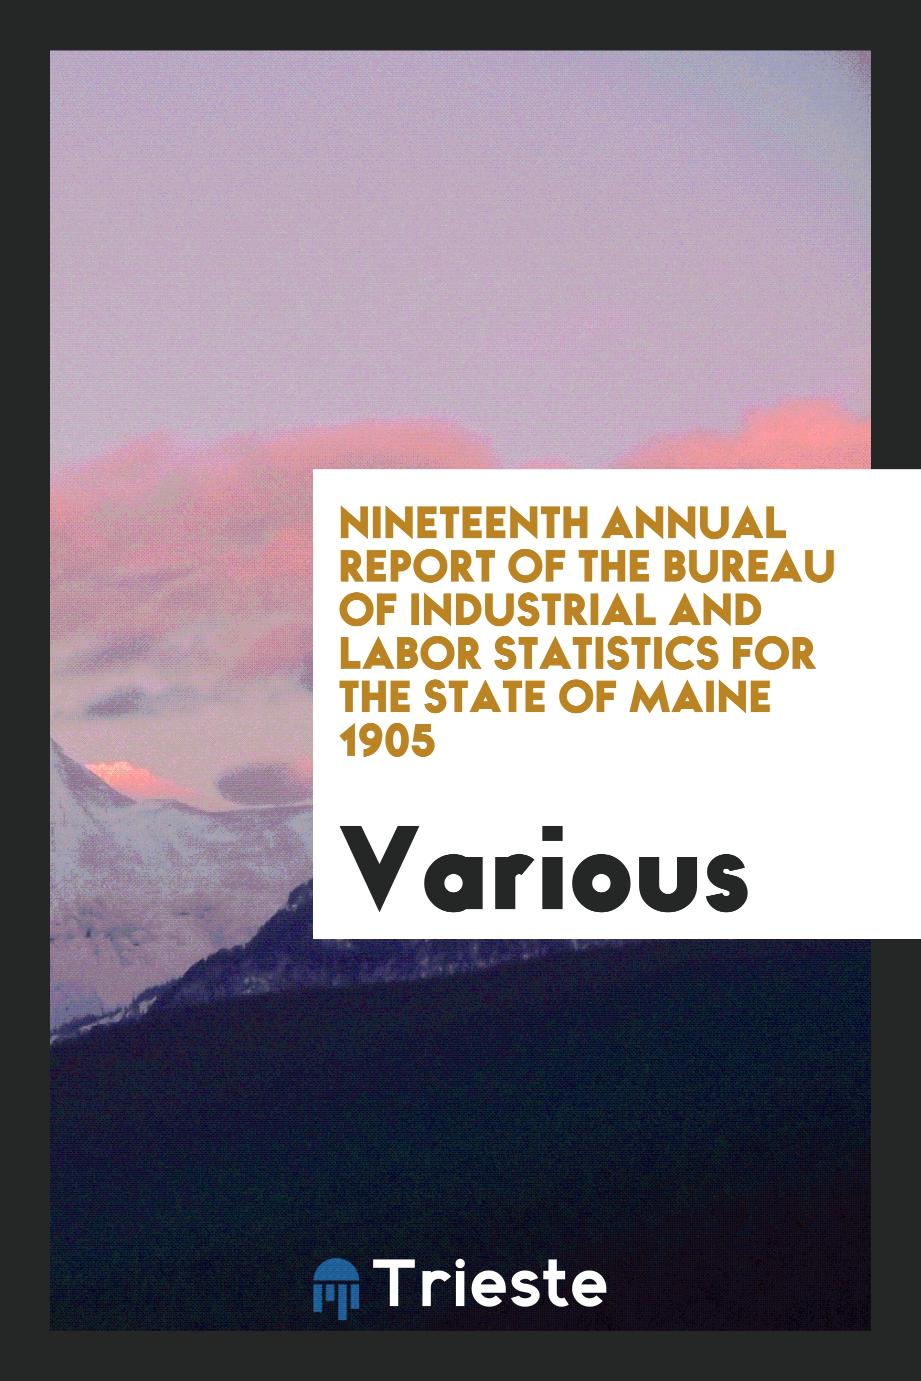 Nineteenth Annual Report of the Bureau of Industrial and Labor Statistics for the State of Maine 1905